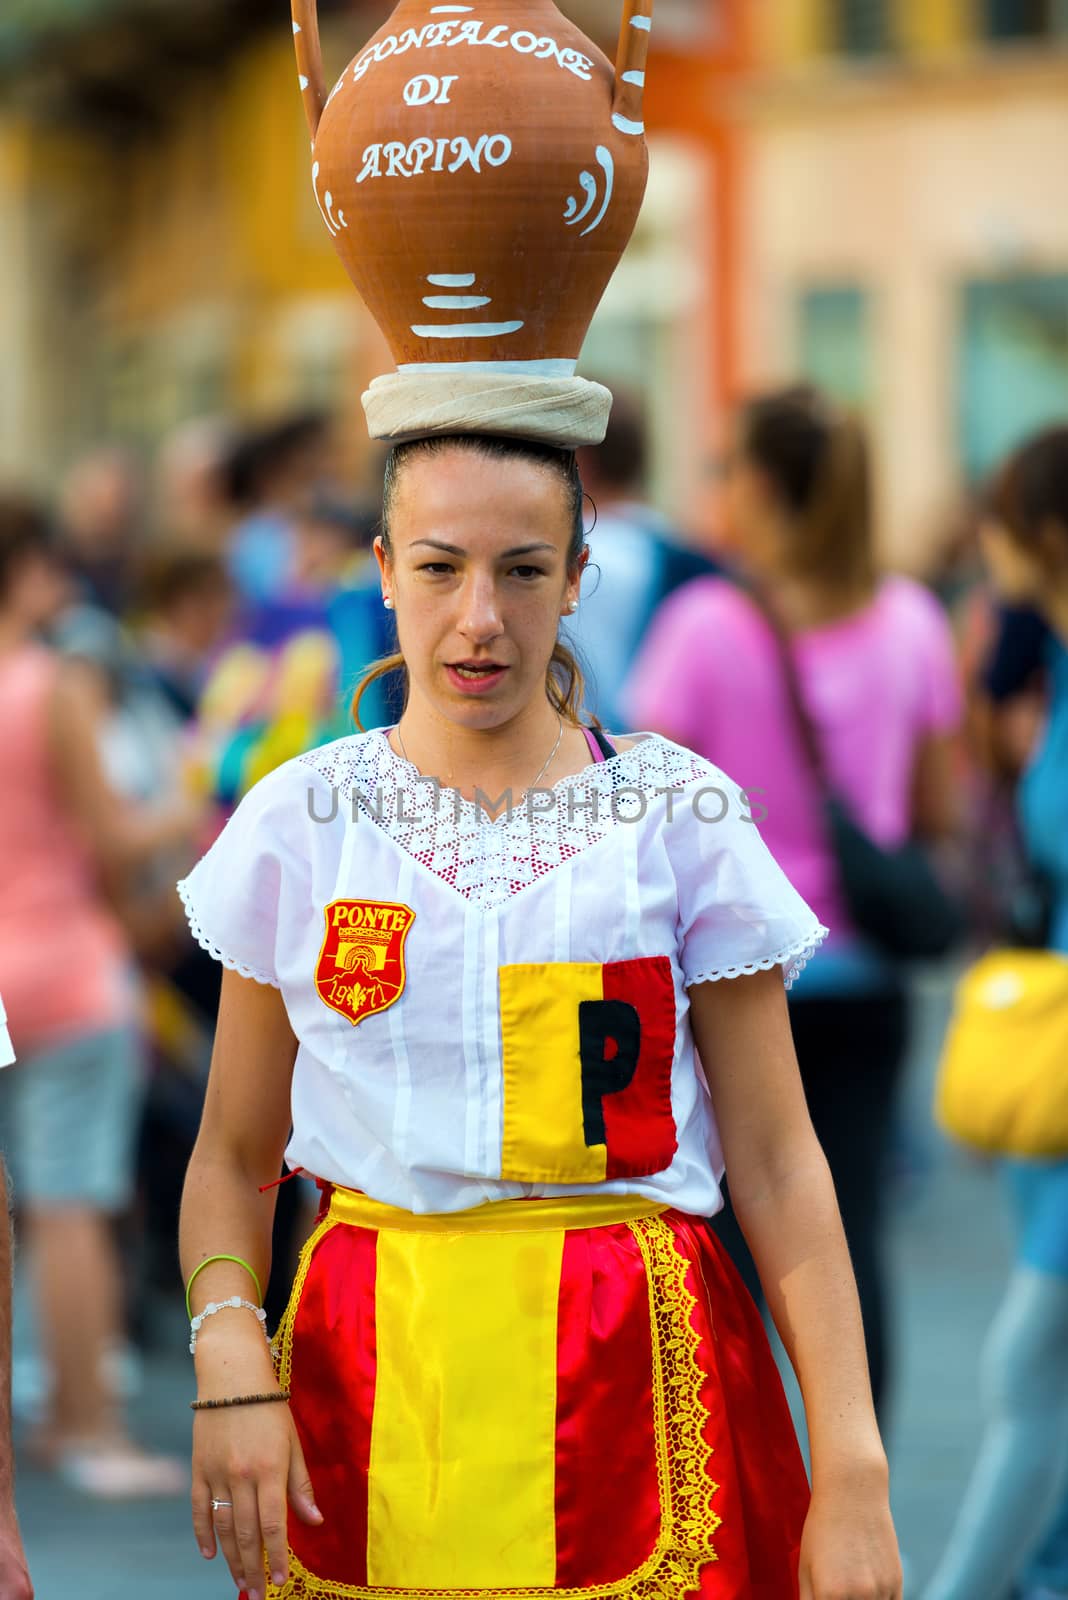 VERONA, ITALY - SEPTEMBER 19, 2015: Tocati, International festival of street games. Corsa con la Cannata - foot race with an expensive pitcher of water balanced on the head.